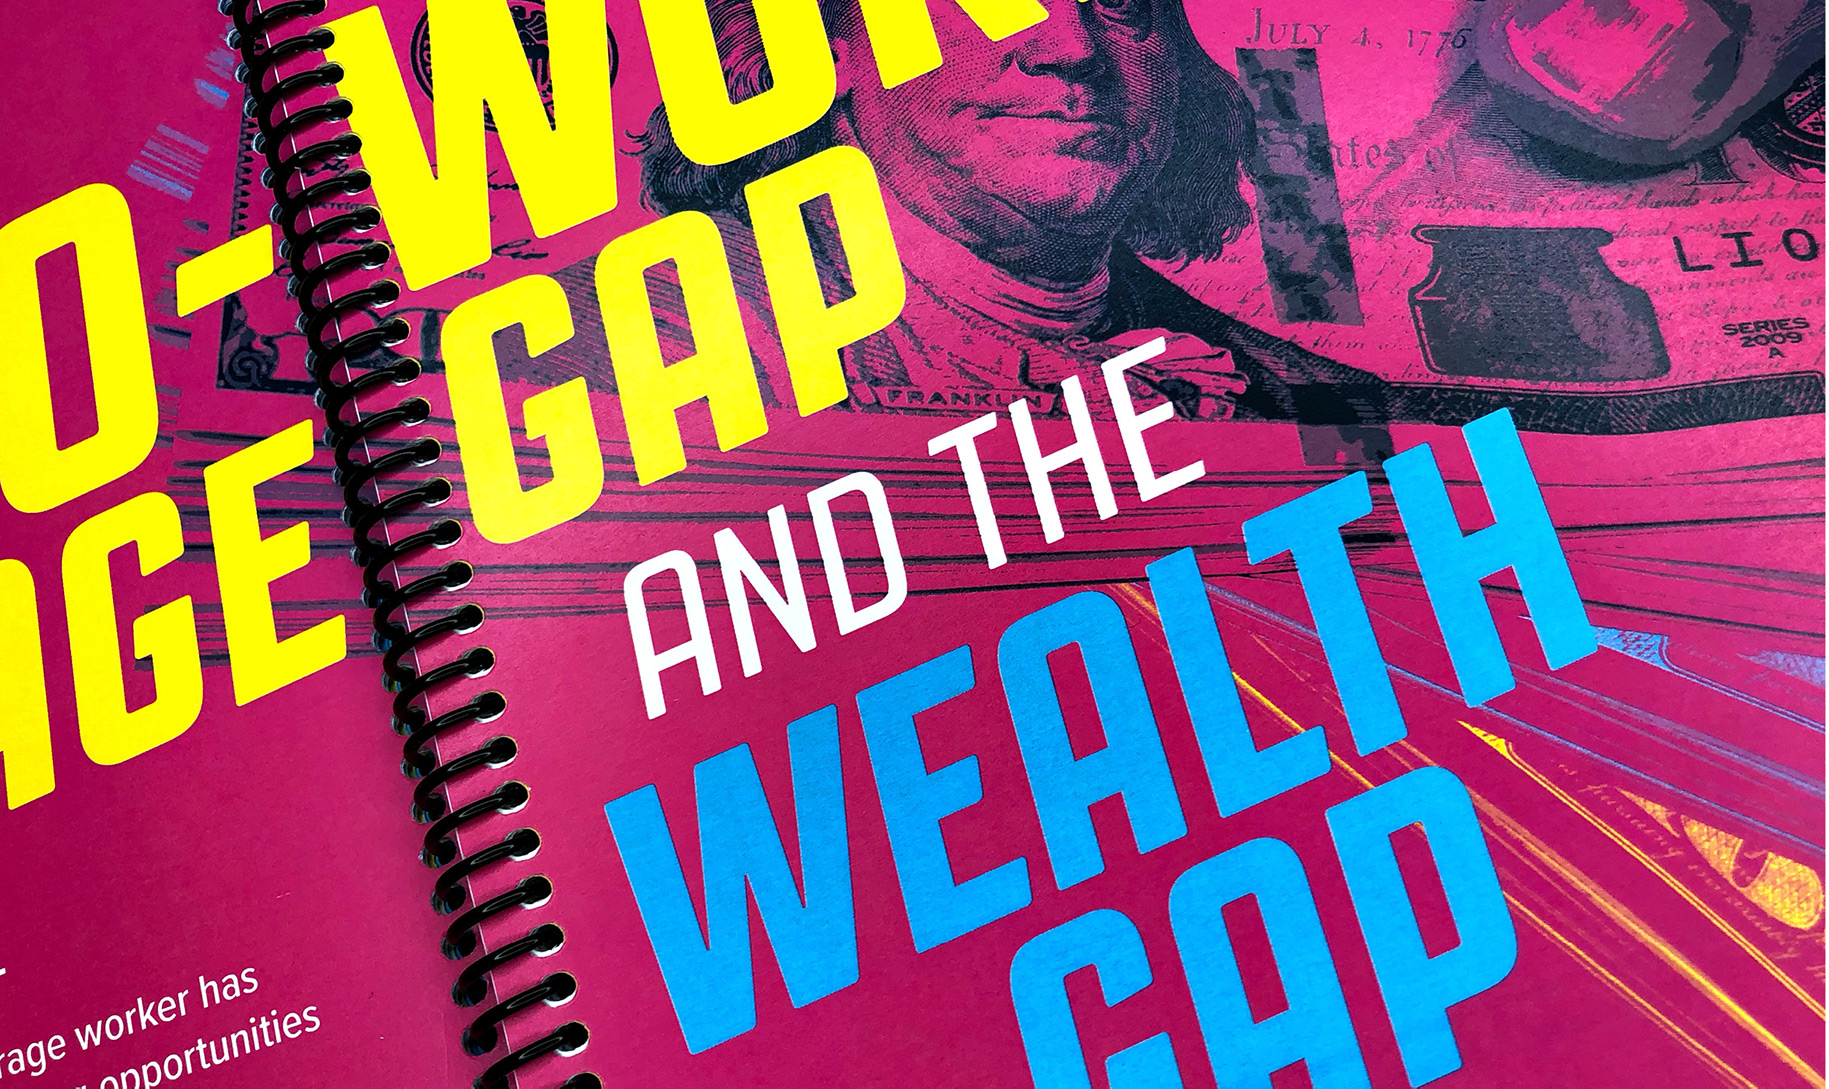 Close-up of book spread with photocollage expressing the wage gap